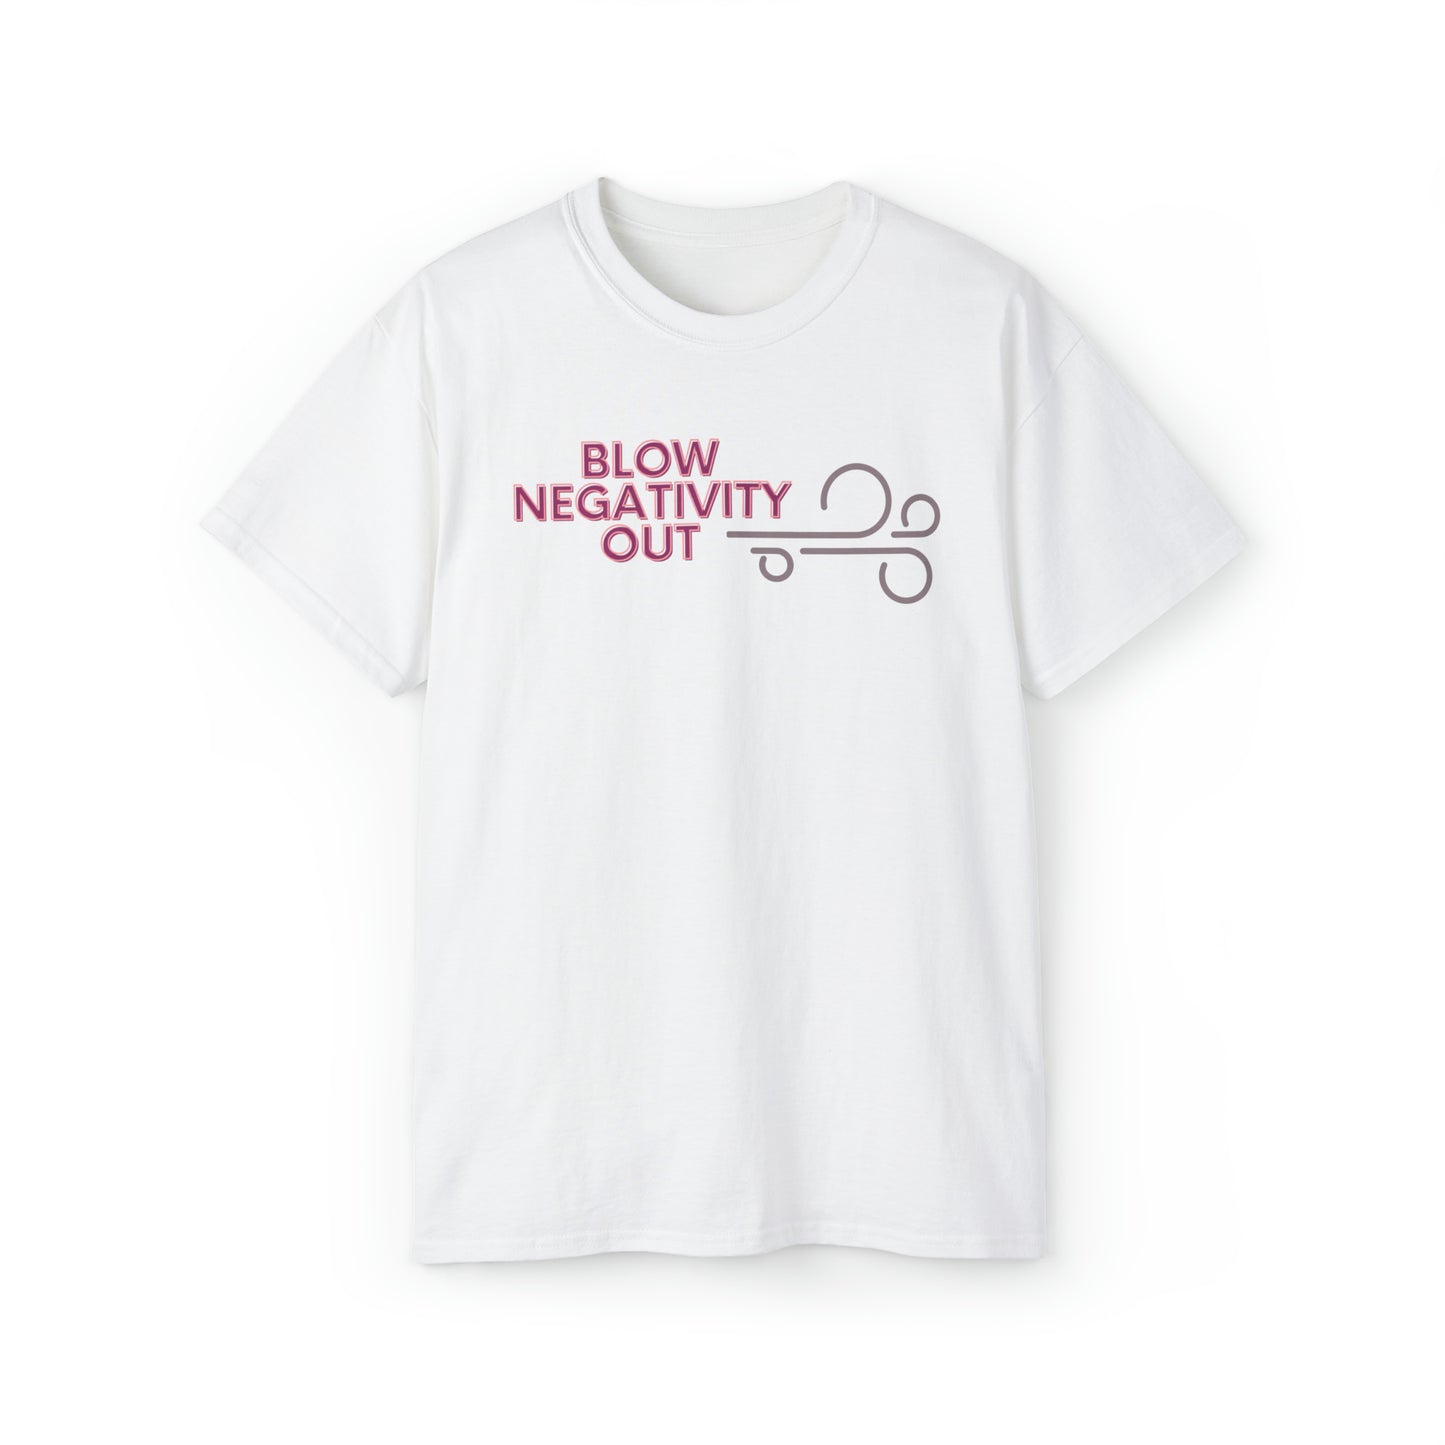 Unisex Ultra Cotton Tee - Blow negativity out